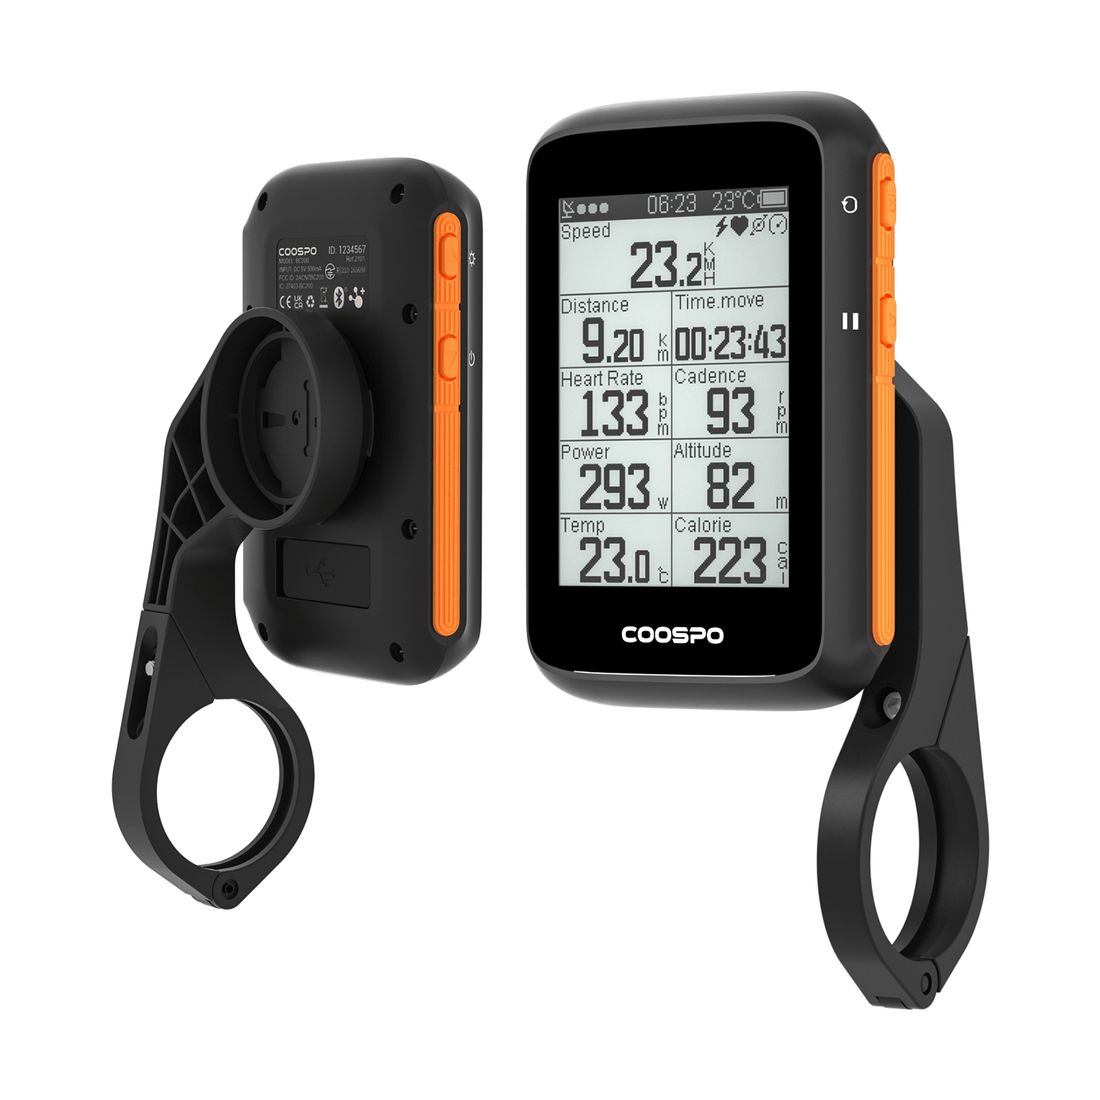 CooSpo-Bike-Computer-Wireless-GPS-Bike-Speedometer-with-Auto-Backlight-Bluetooth-ANT-Cycling-GPS-Computer-Bicycle-Computer-BC200-with-Waterproof_5_1100x.png